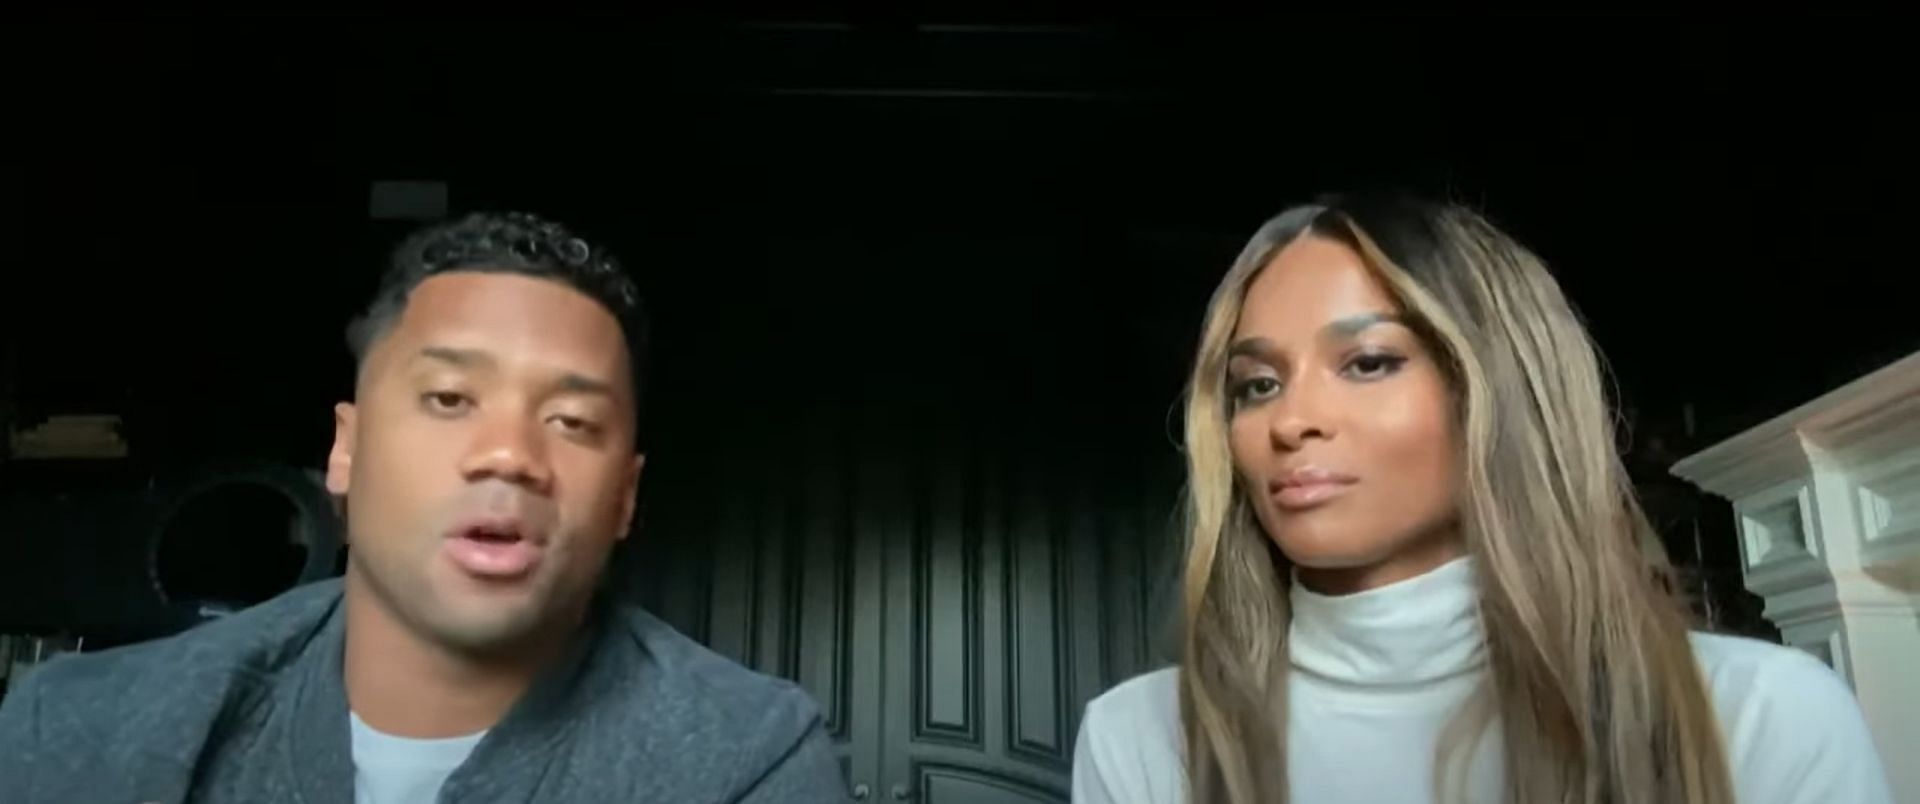 Russell and Ciara on the Today Show